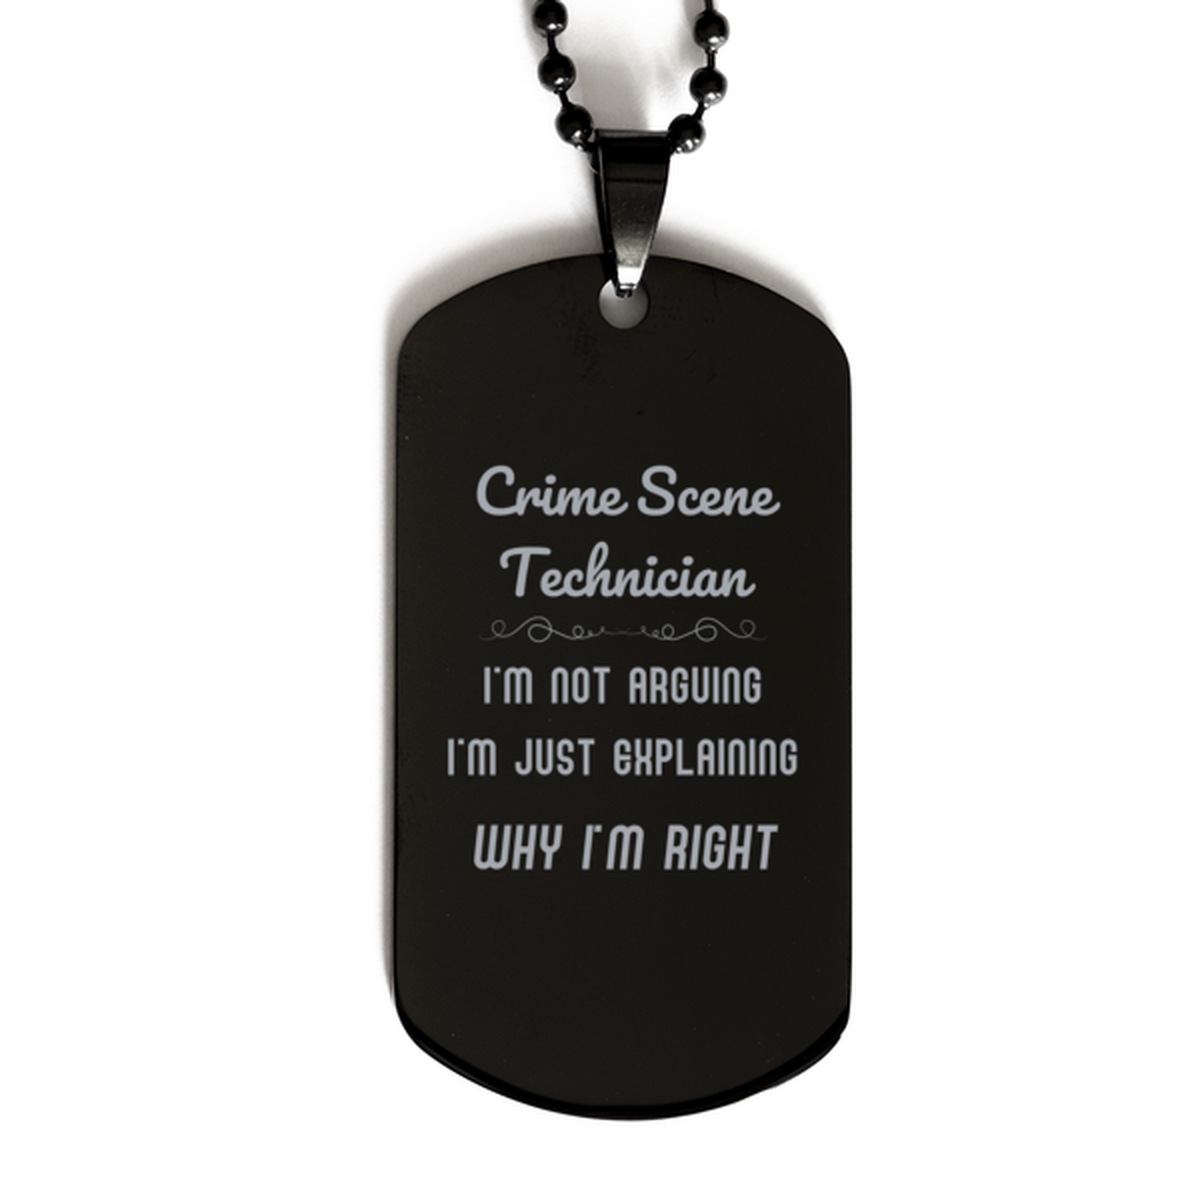 Crime Scene Technician I'm not Arguing. I'm Just Explaining Why I'm RIGHT Black Dog Tag, Funny Saying Quote Crime Scene Technician Gifts For Crime Scene Technician Graduation Birthday Christmas Gifts for Men Women Coworker